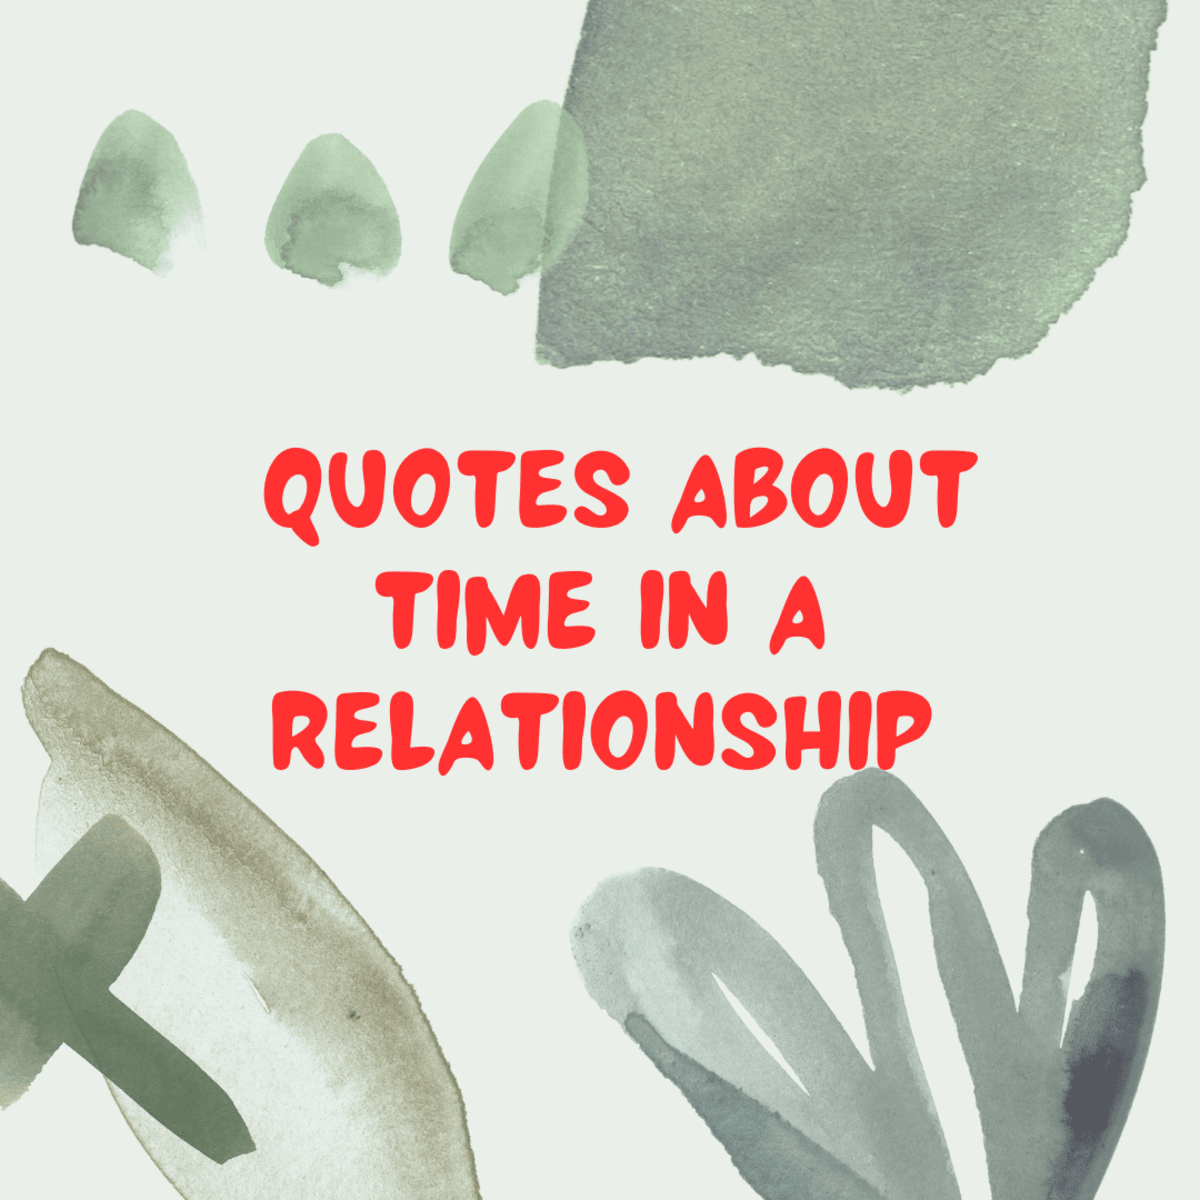 You are currently viewing Quotes about Time in a Relationship: 25 Inspiring Quotes